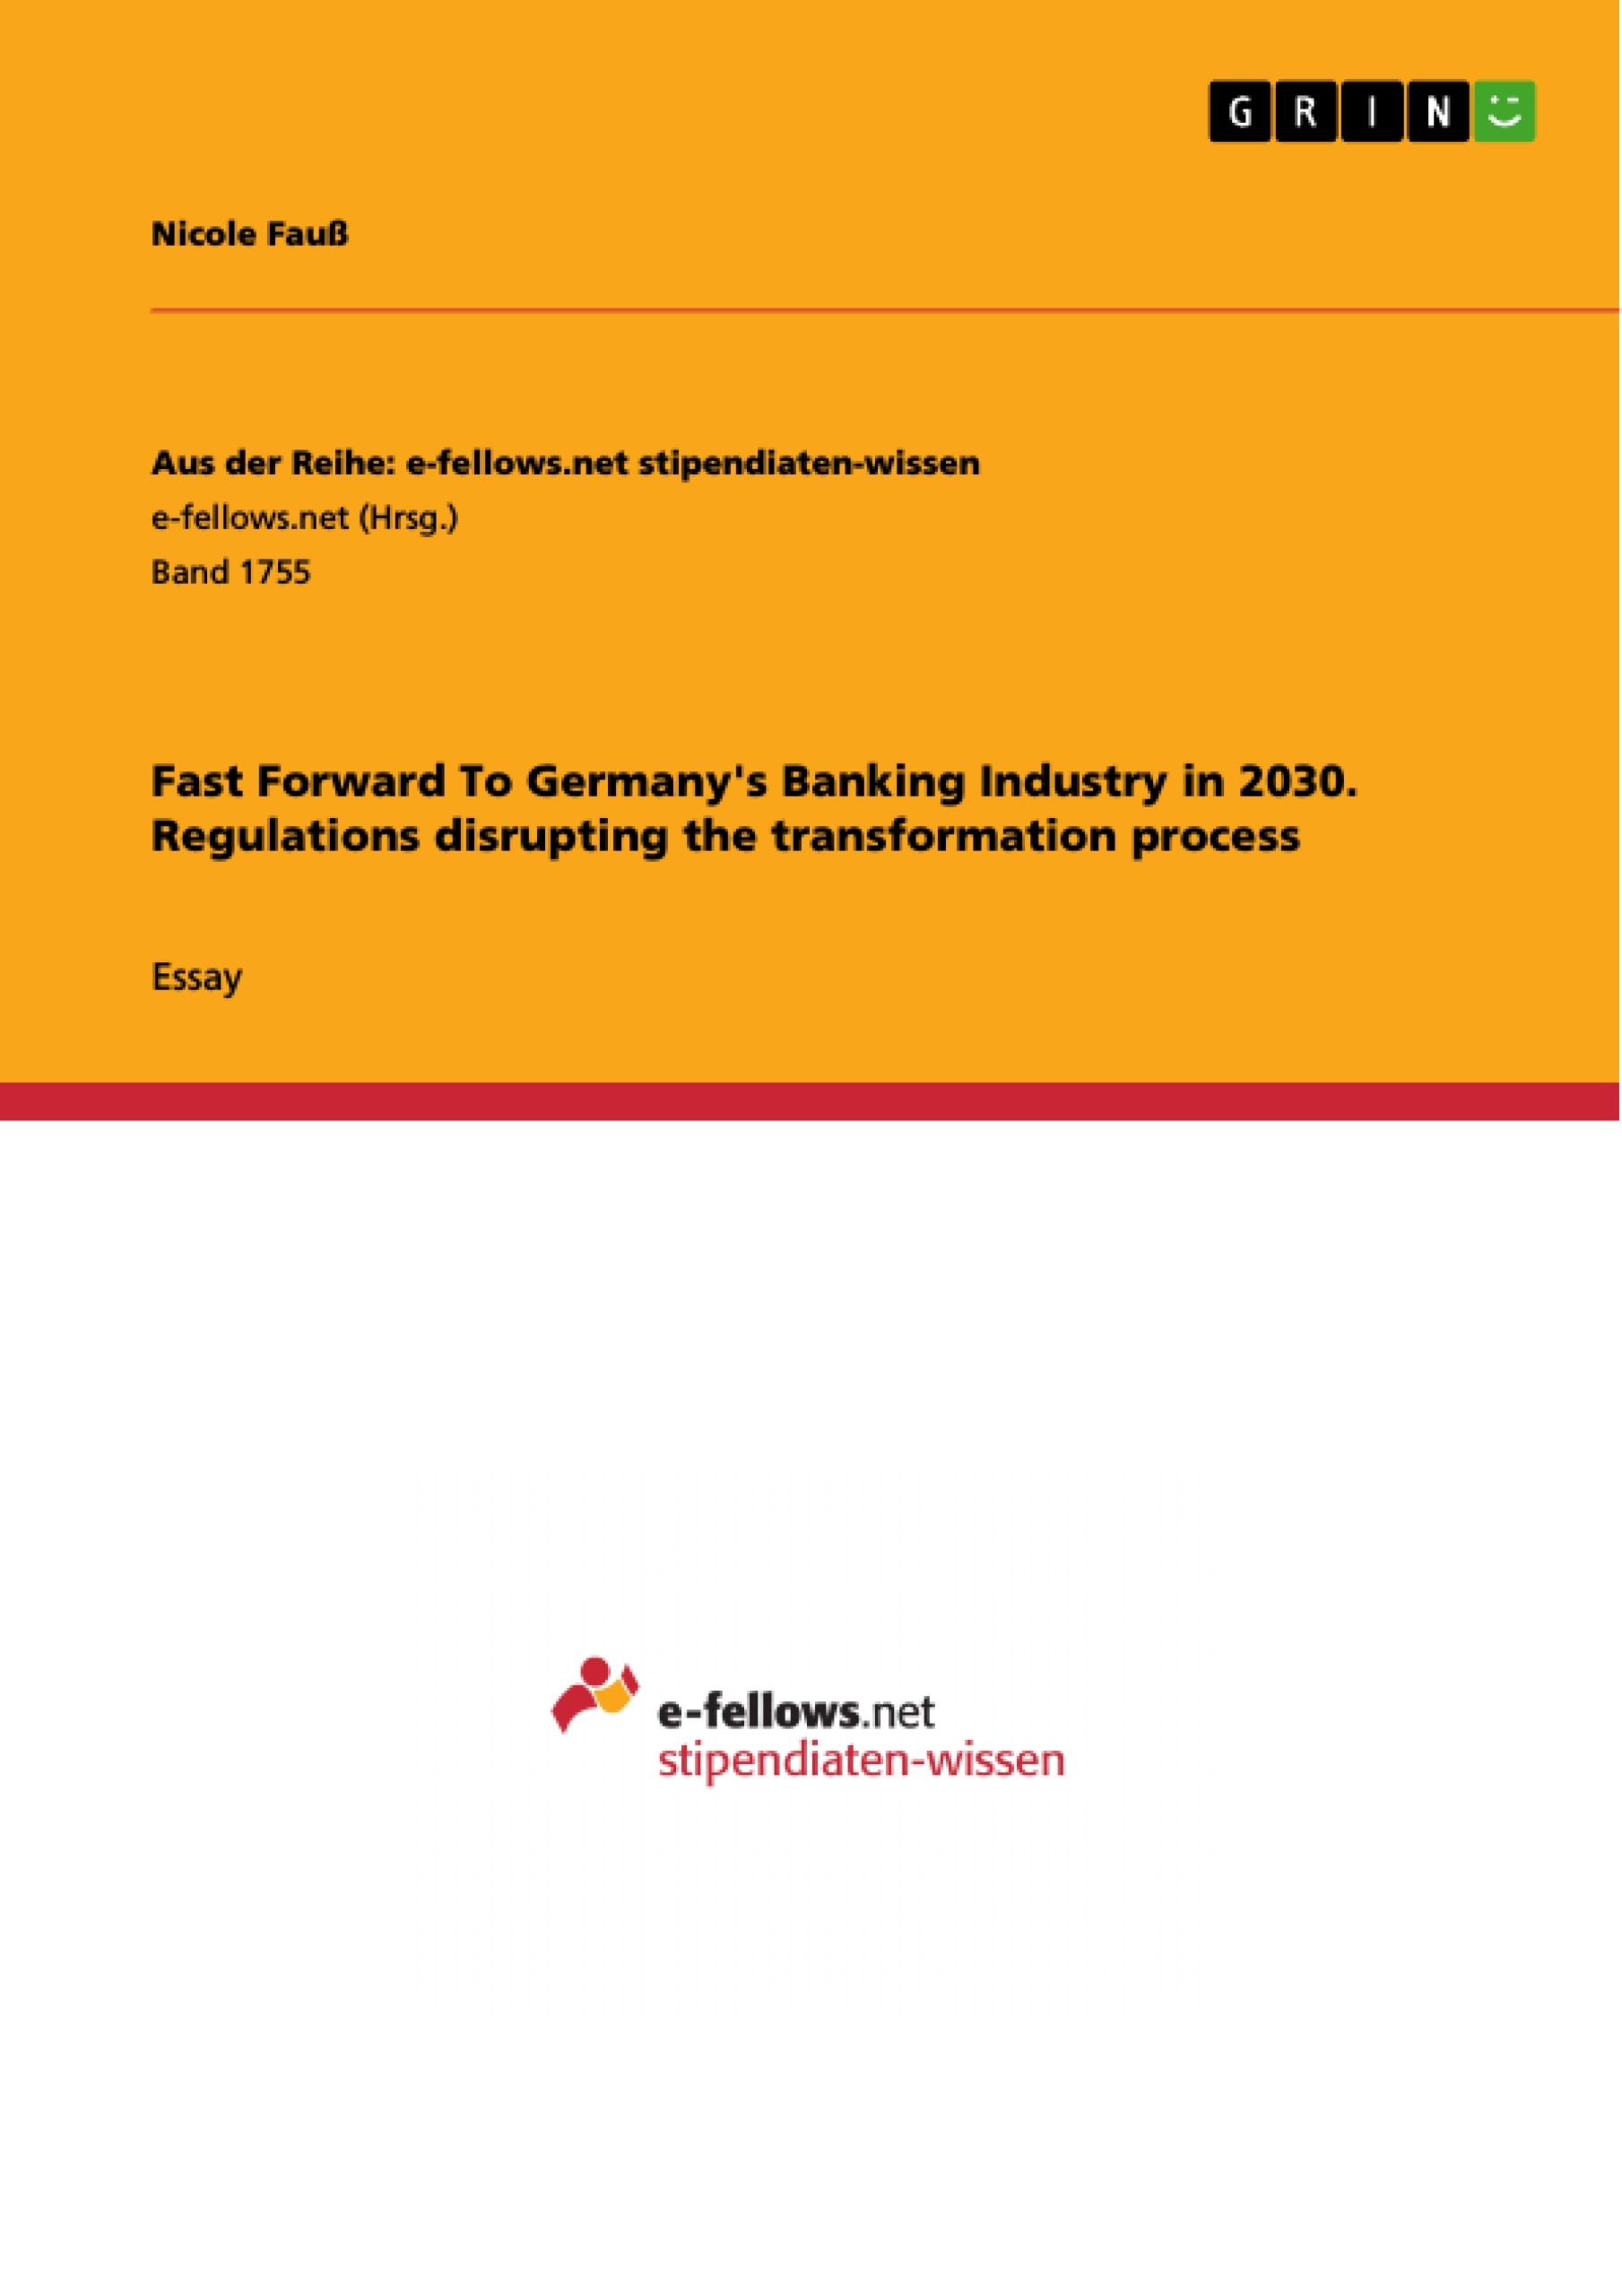 Titre: Fast Forward To Germany's Banking Industry in 2030. Regulations disrupting the transformation process